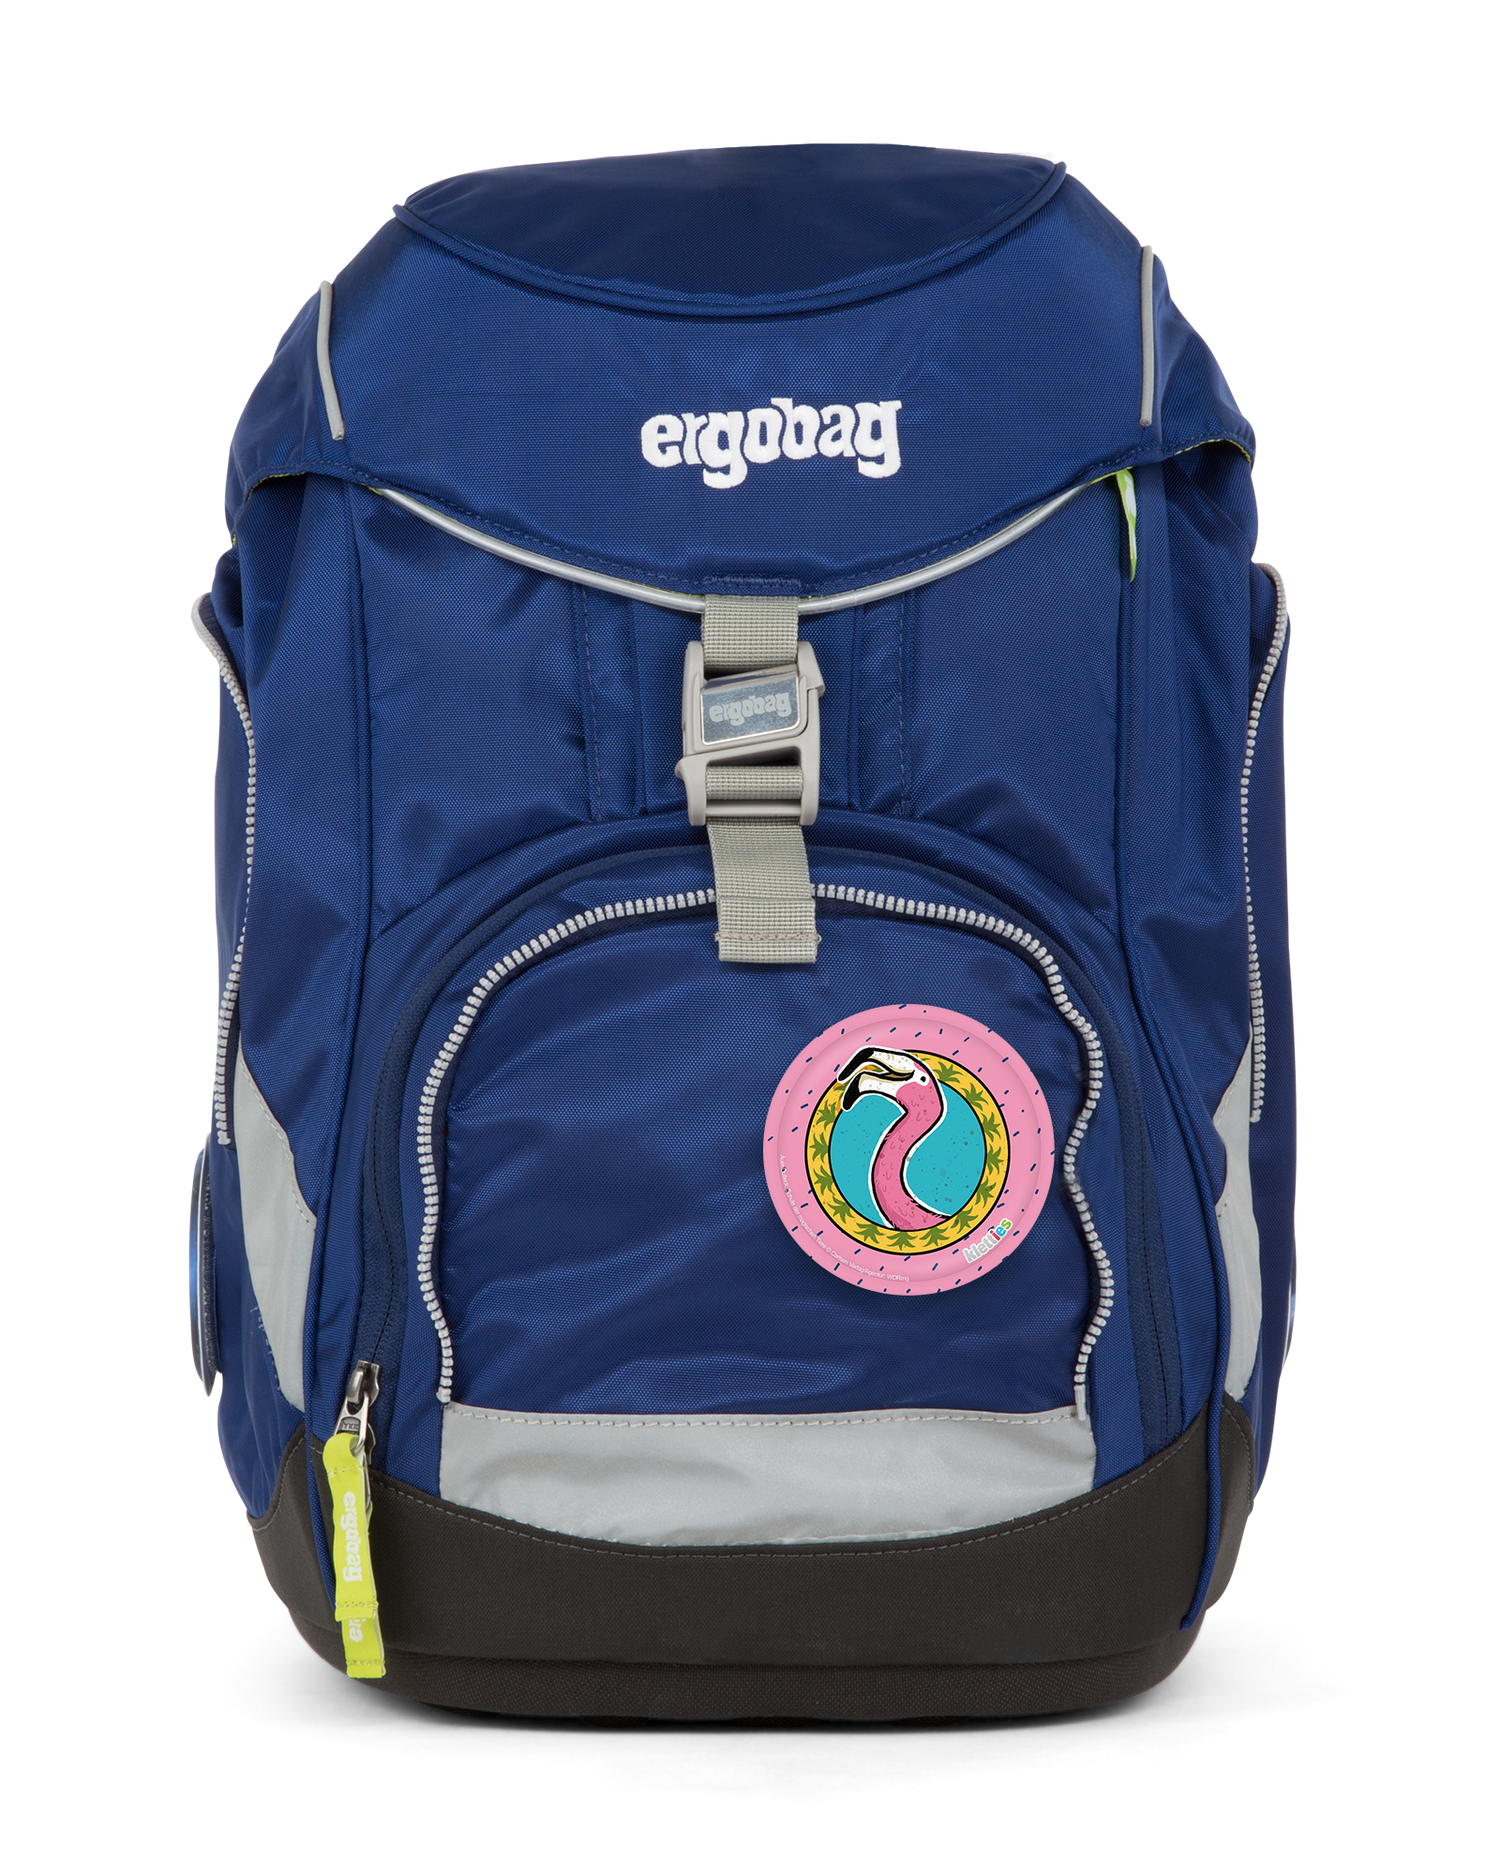 ergobag backpack with SdmT Polly Klettie